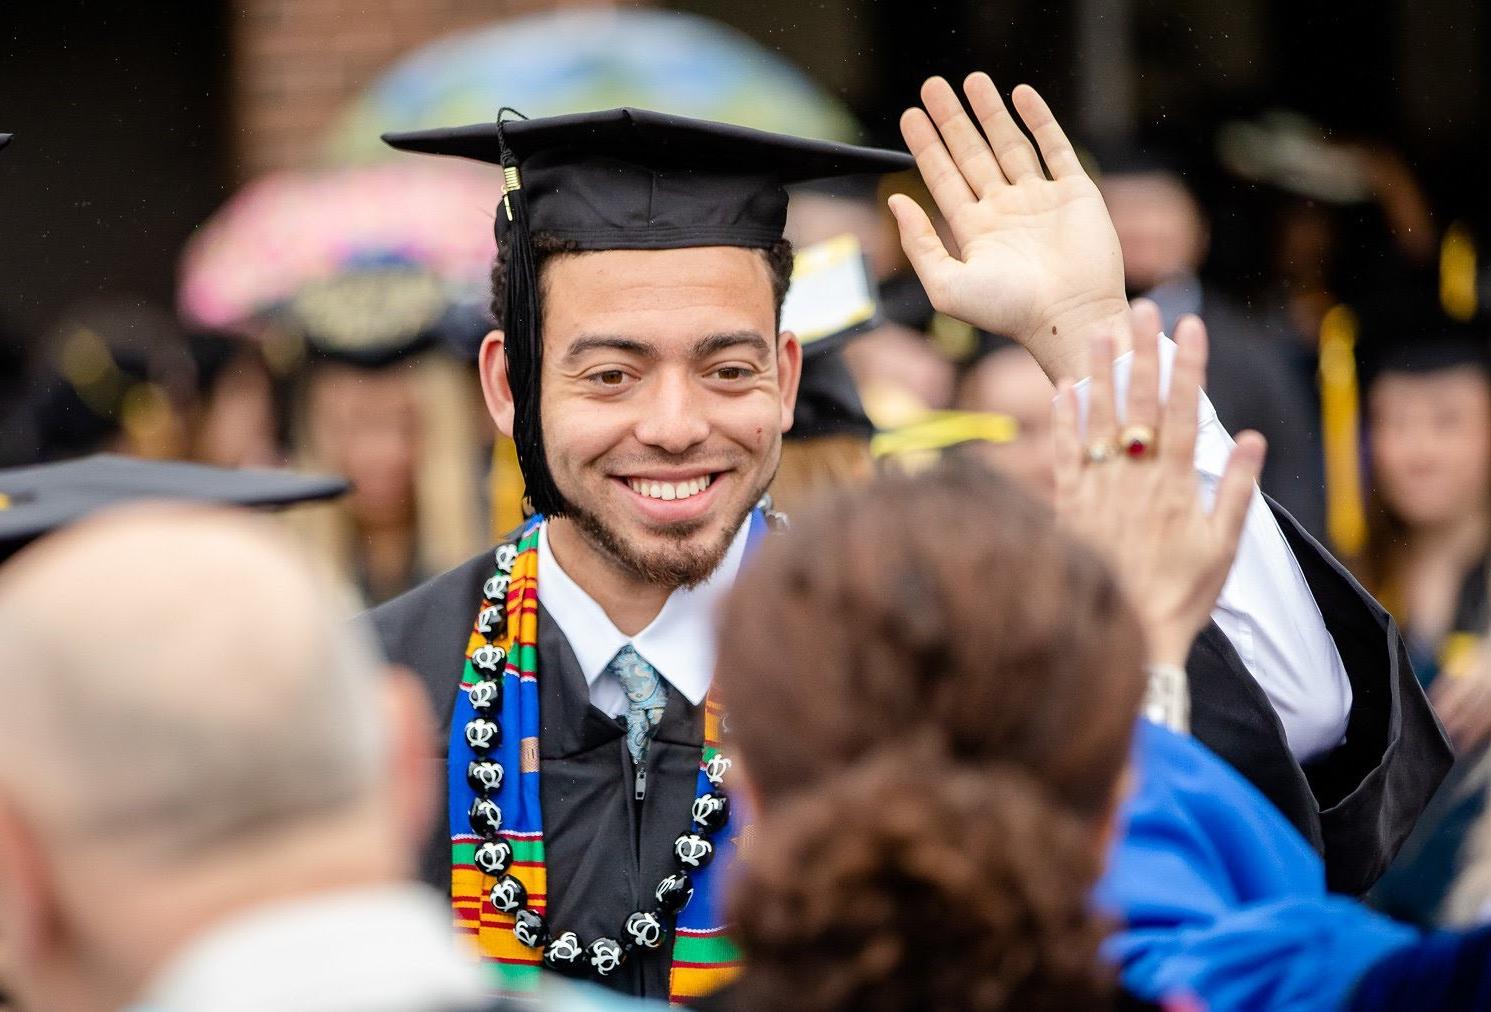 Student graduating giving a high five